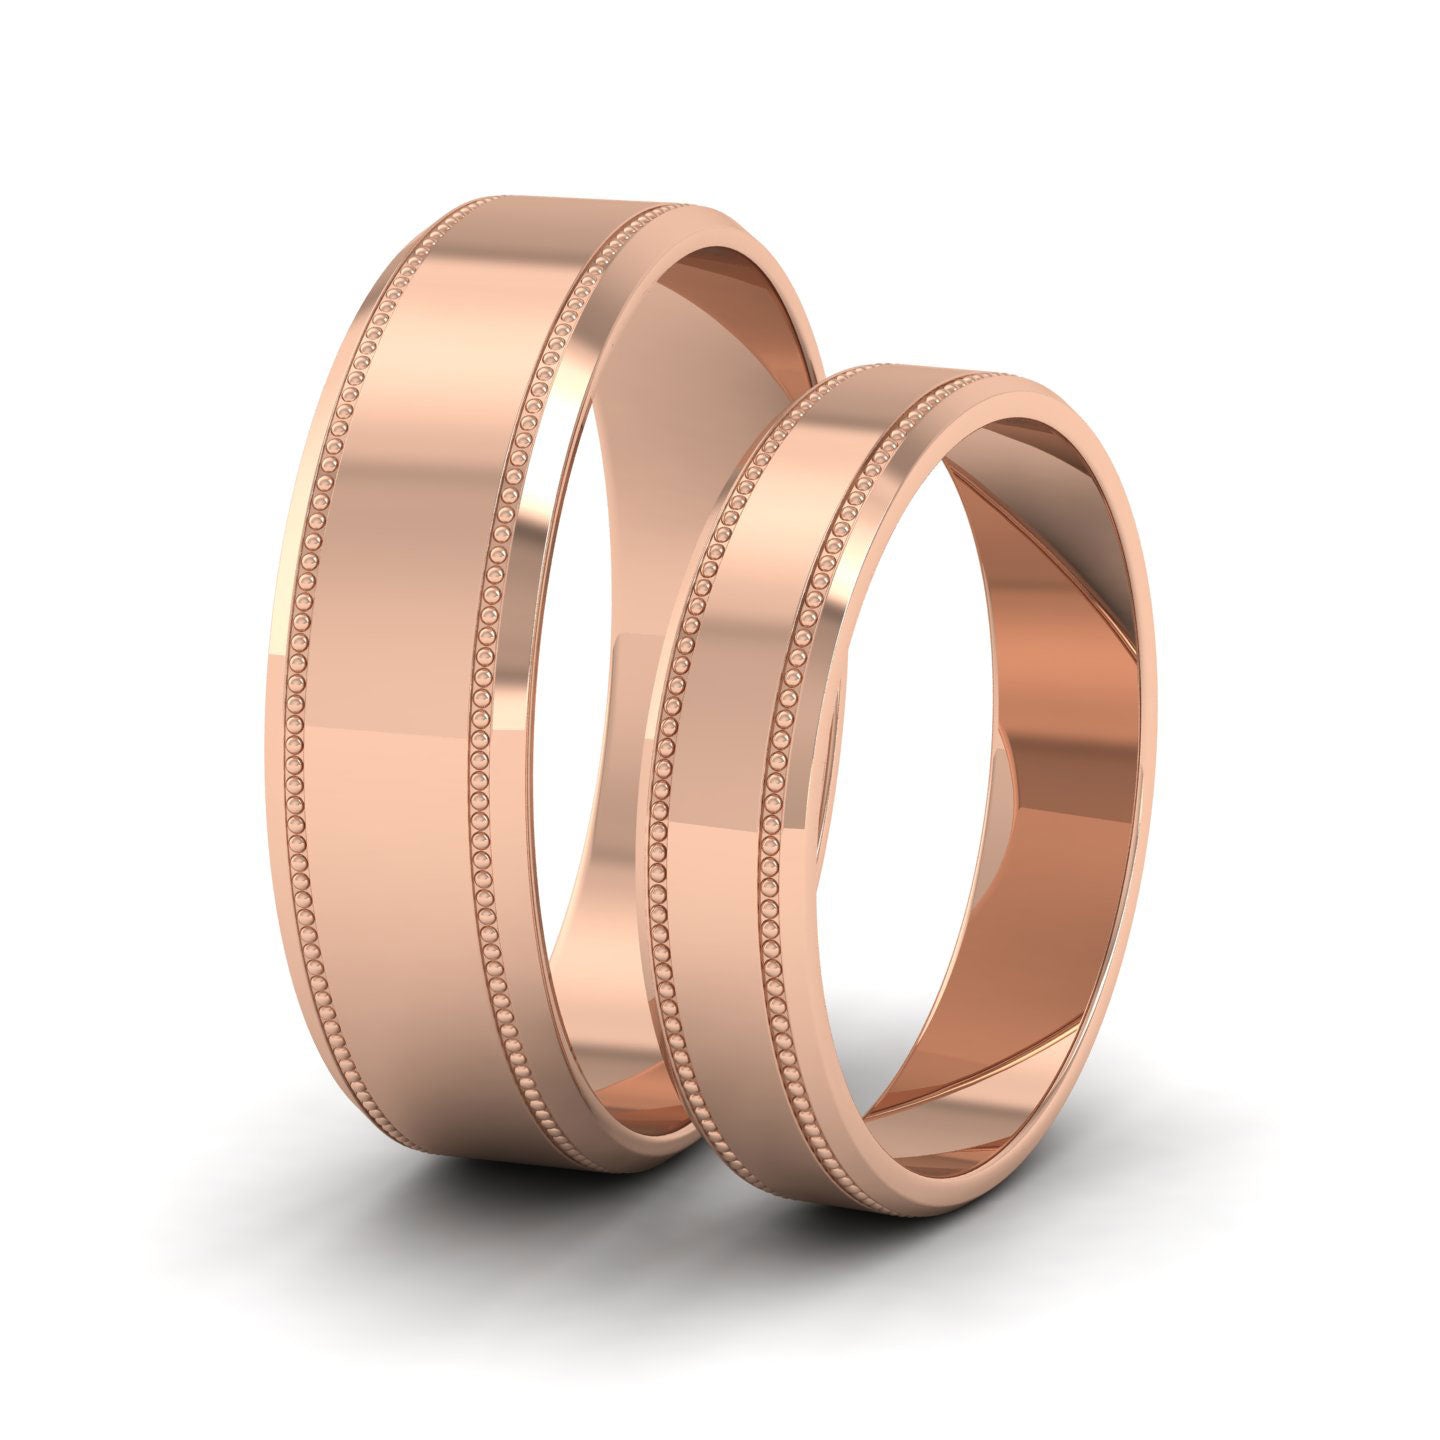 Bevelled Edge And Millgrain Pattern 18ct Rose Gold 6mm Flat Wedding Ring